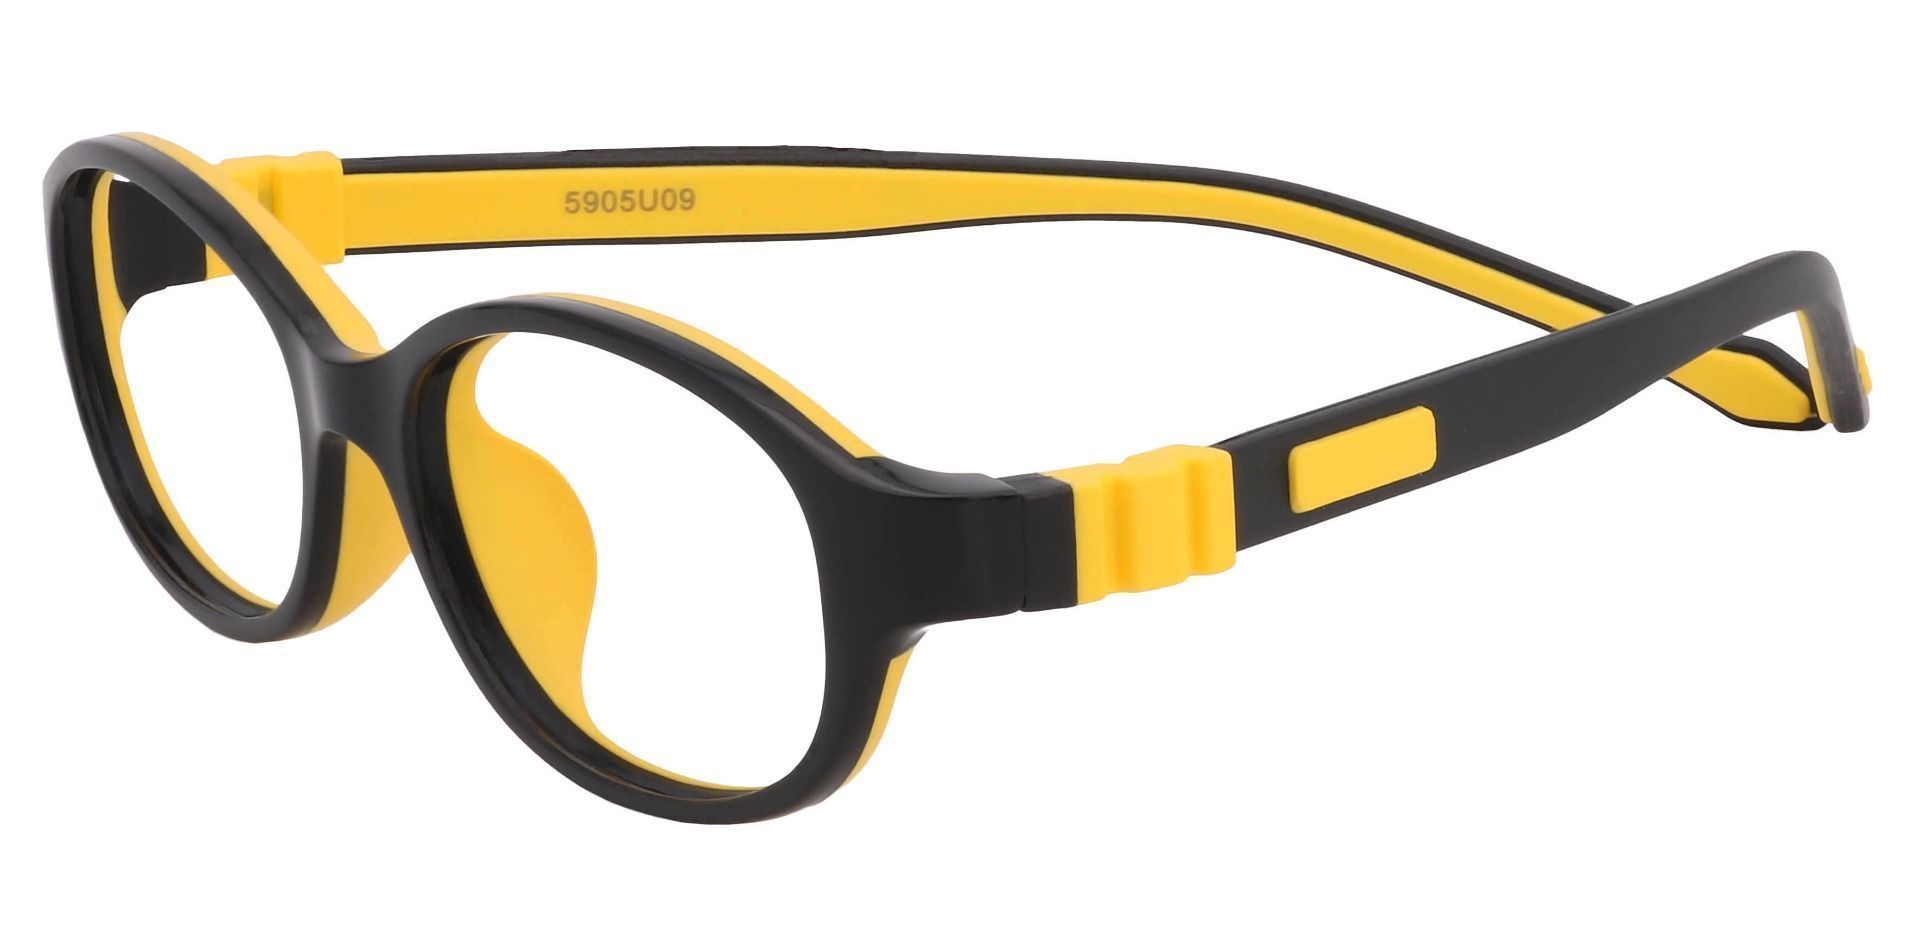 Stone Oval Lined Bifocal Glasses - The Frame Is Black And Yellow